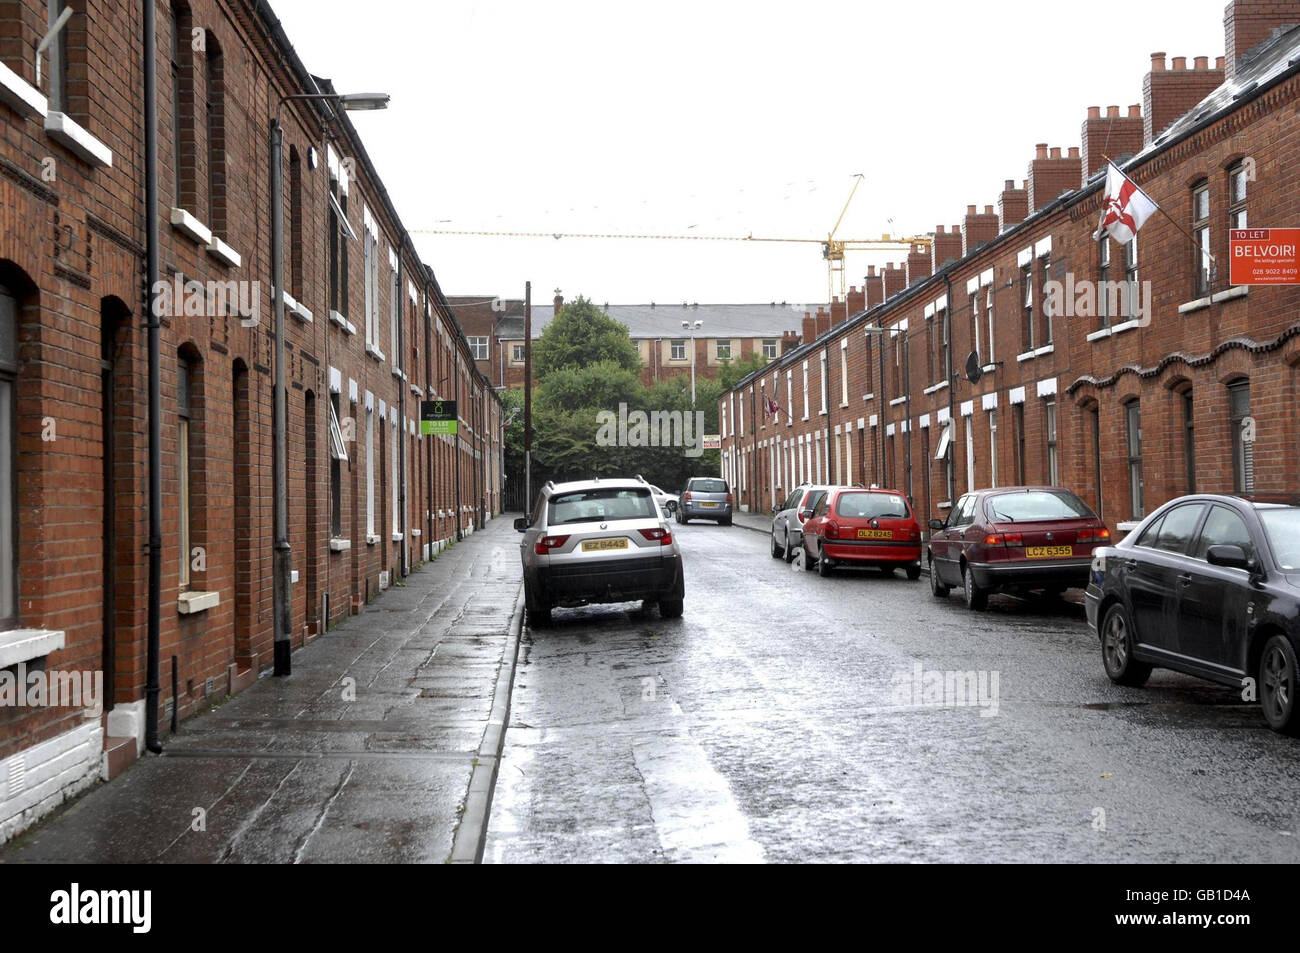 A general view of the road in Egeria, South Belfast, where a landlord placed a sign in the window advertising a property, saying 'This property is not available for any foreigners.' Stock Photo